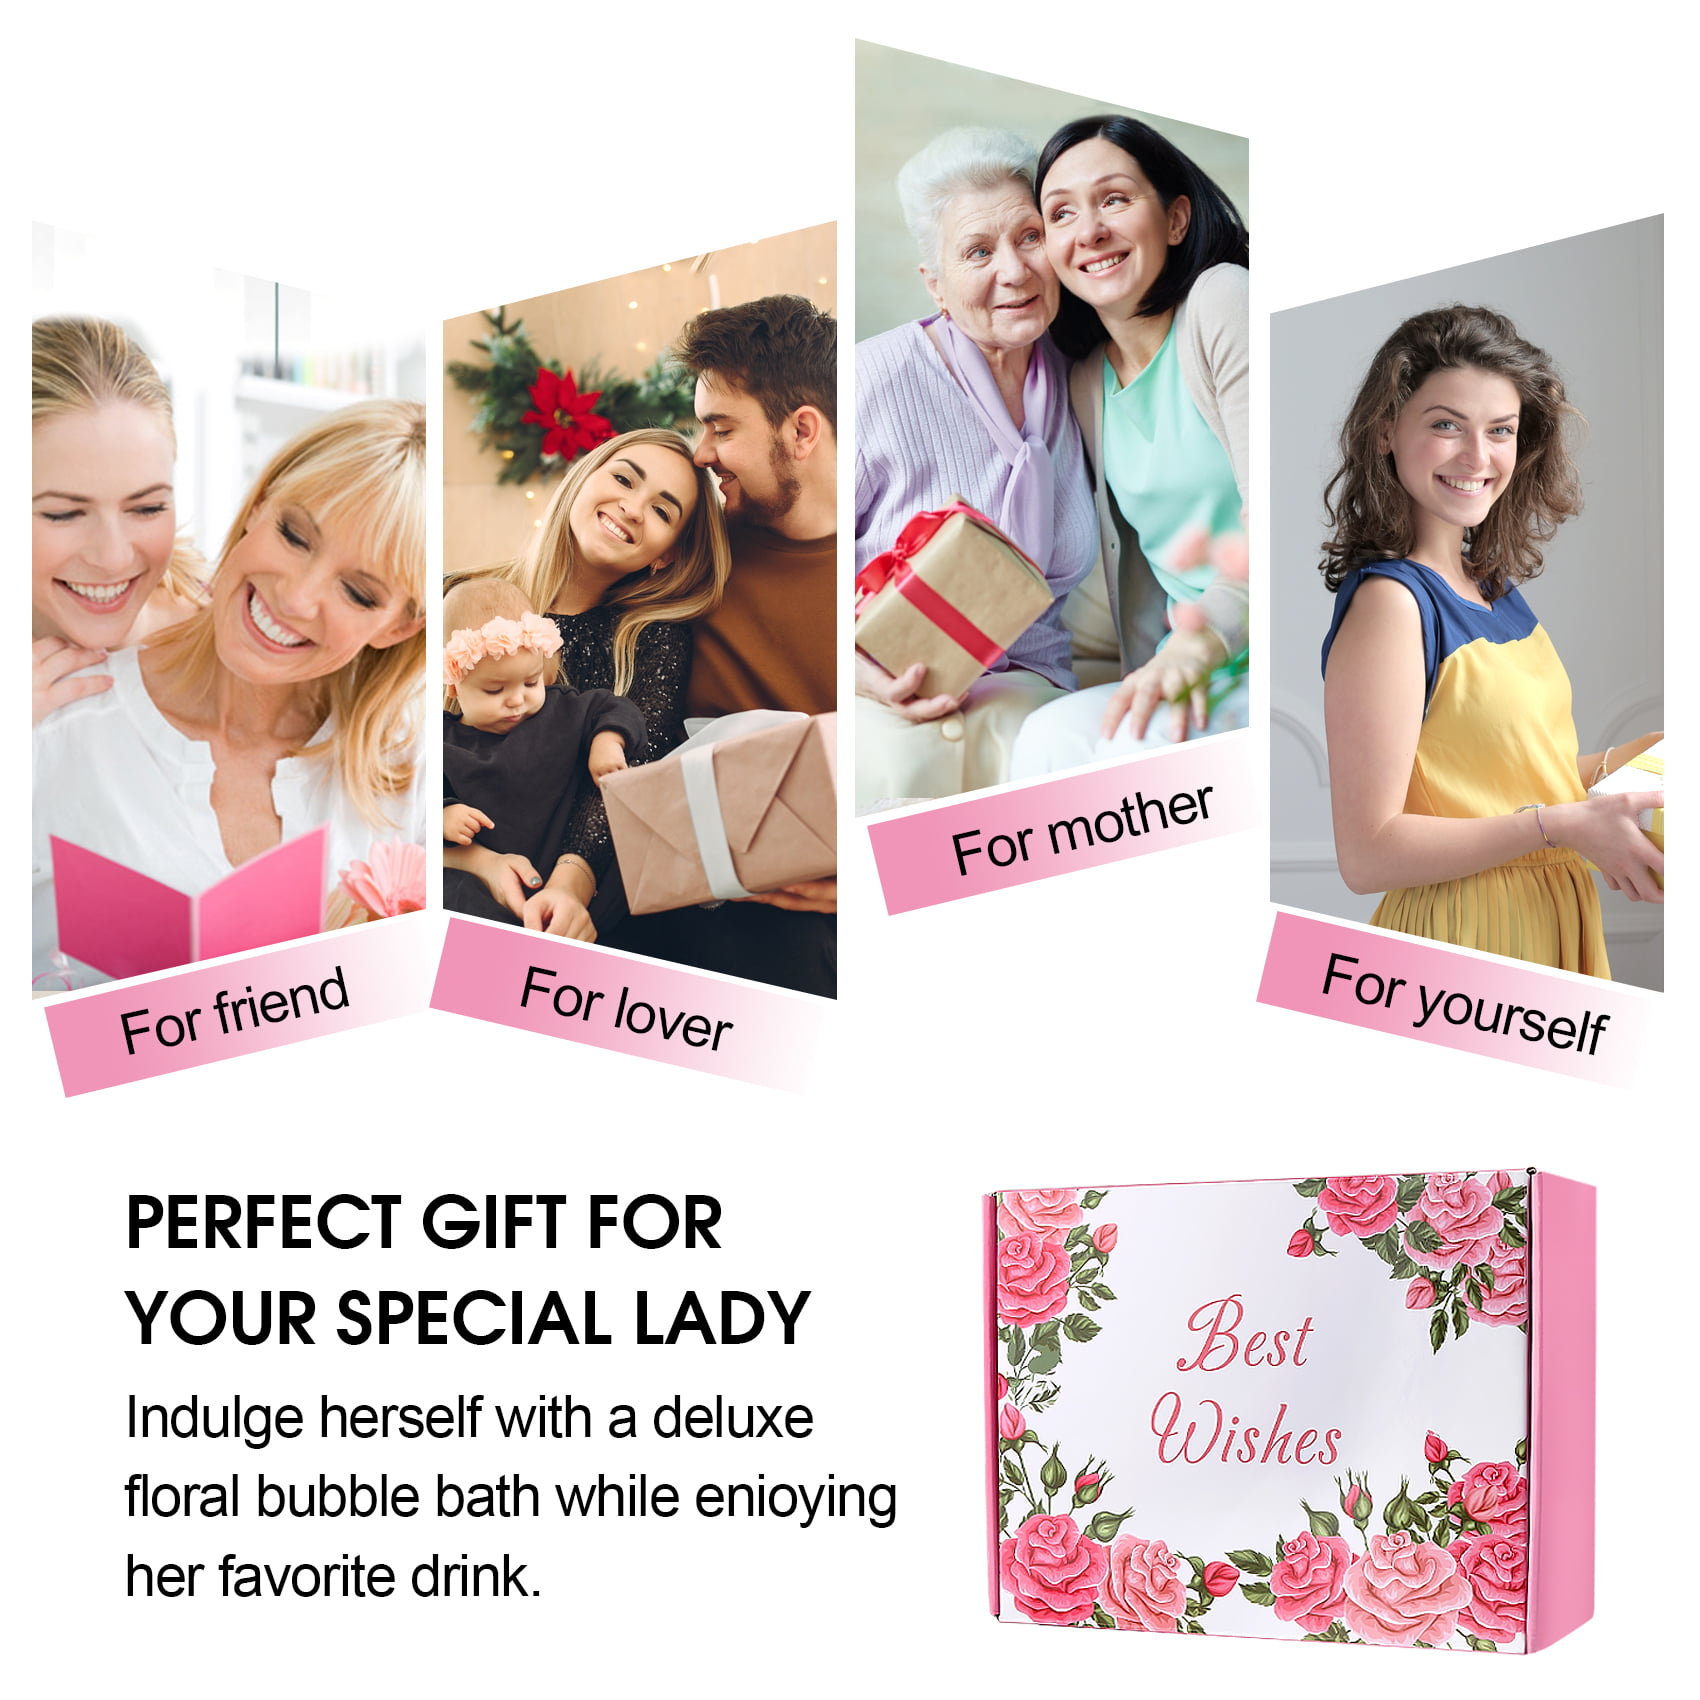 Christmas gift ideas for women - mums, wives, sisters and friends